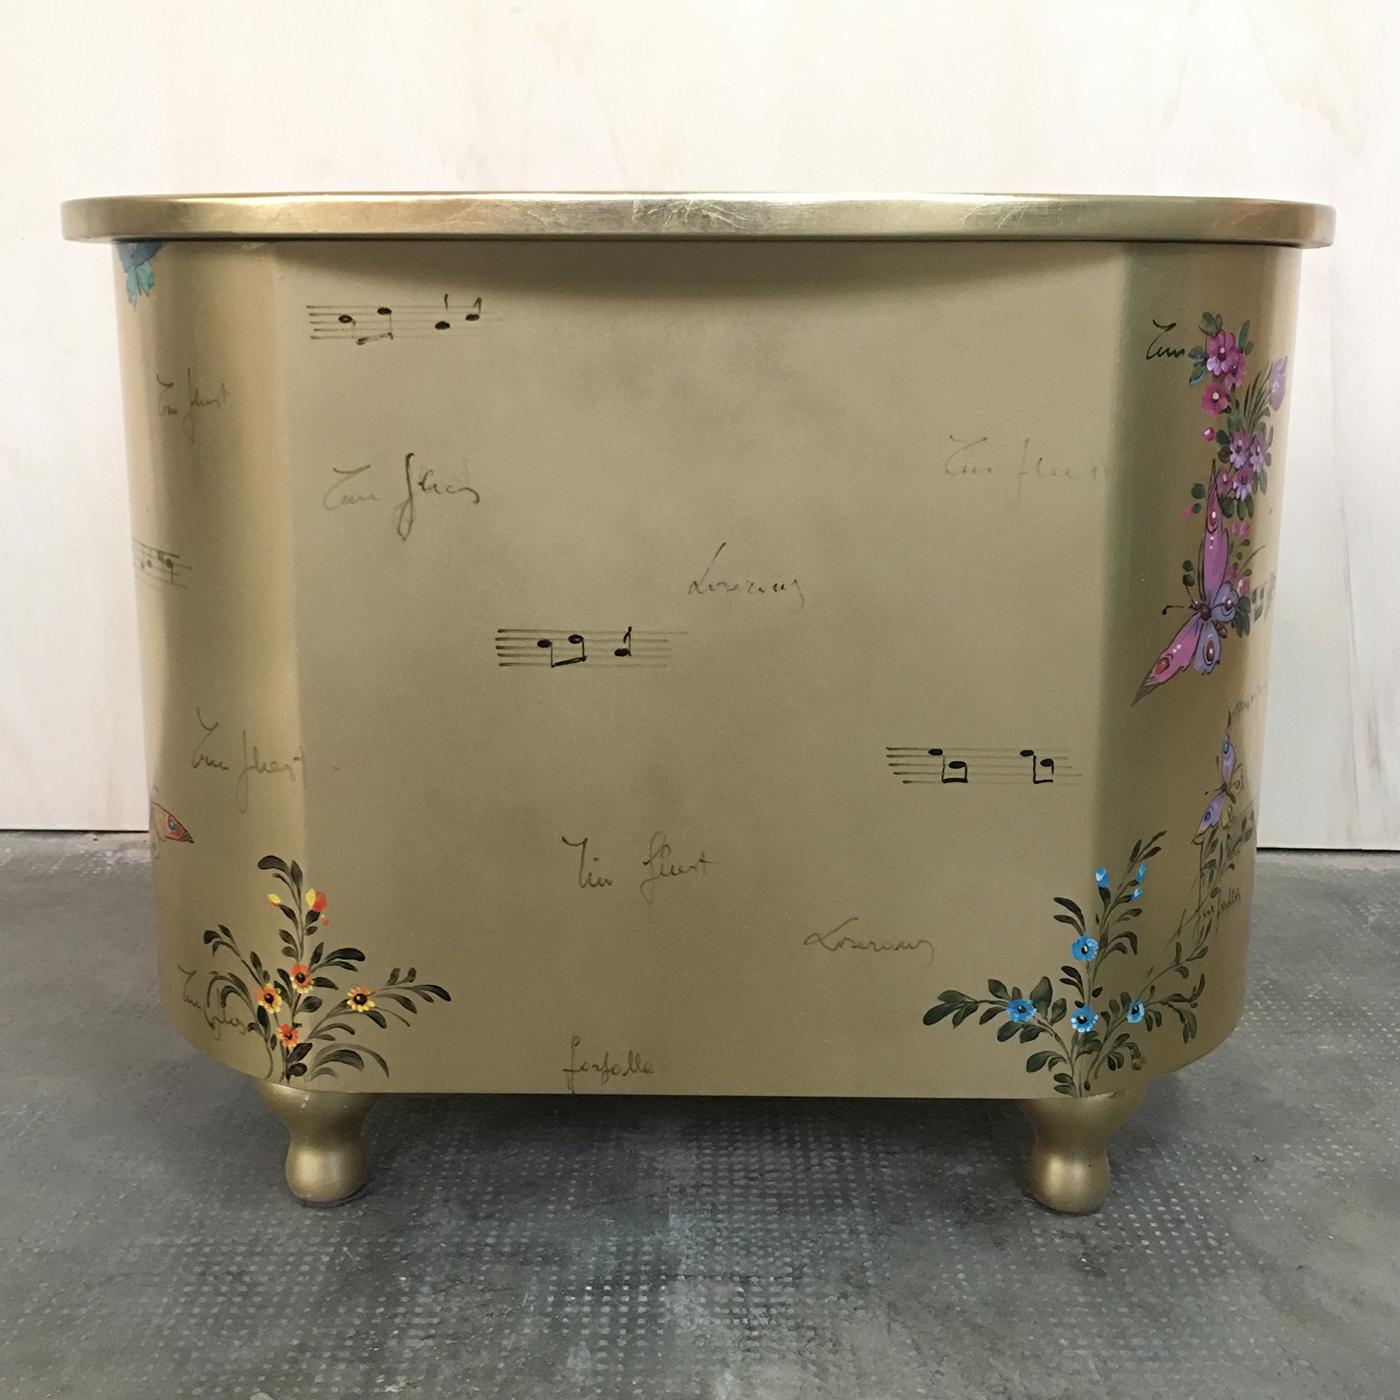 A curved bedside table covered with a gold leaf and with delicious paintings of flowers, butterflies and music by an art master. It has a laminated wood structure with 3 drawers and 2 secrets. Inside the decorated book, the customer can enter his